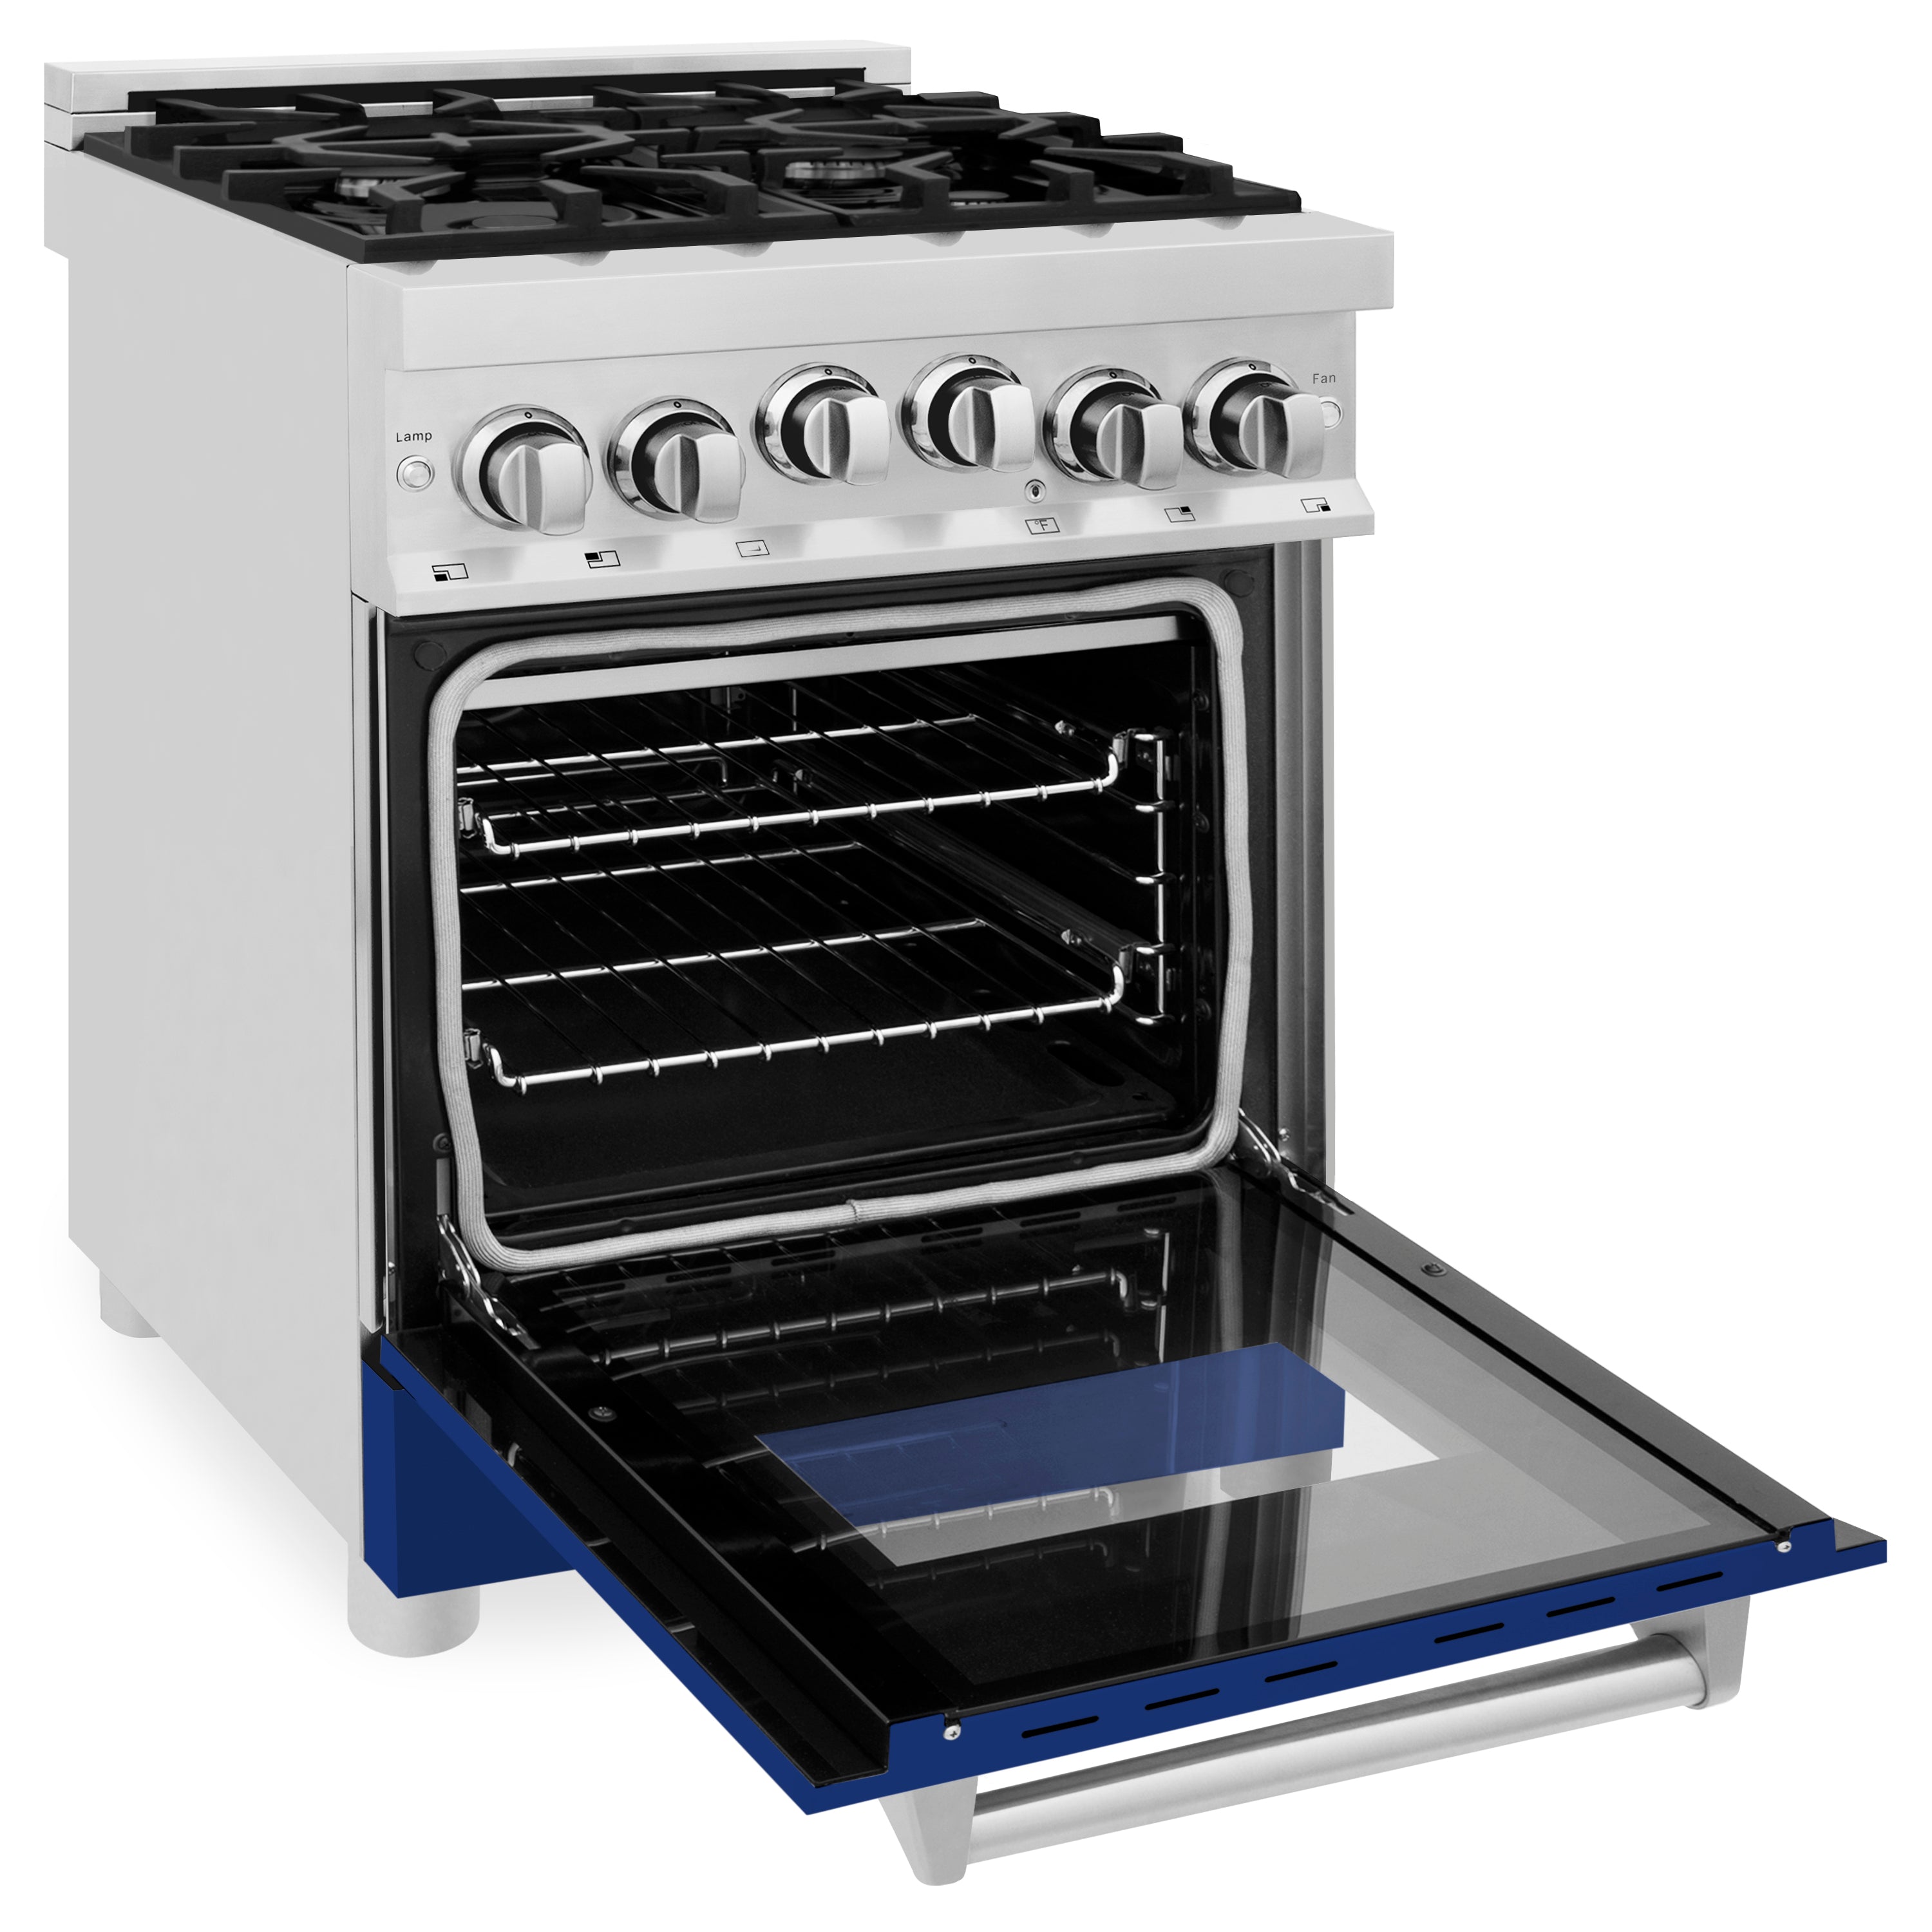 ZLINE 24" 2.8 cu. ft. Range with Gas Stove and Gas Oven in Stainless Steel and Blue Gloss Door (RG-BG-24)